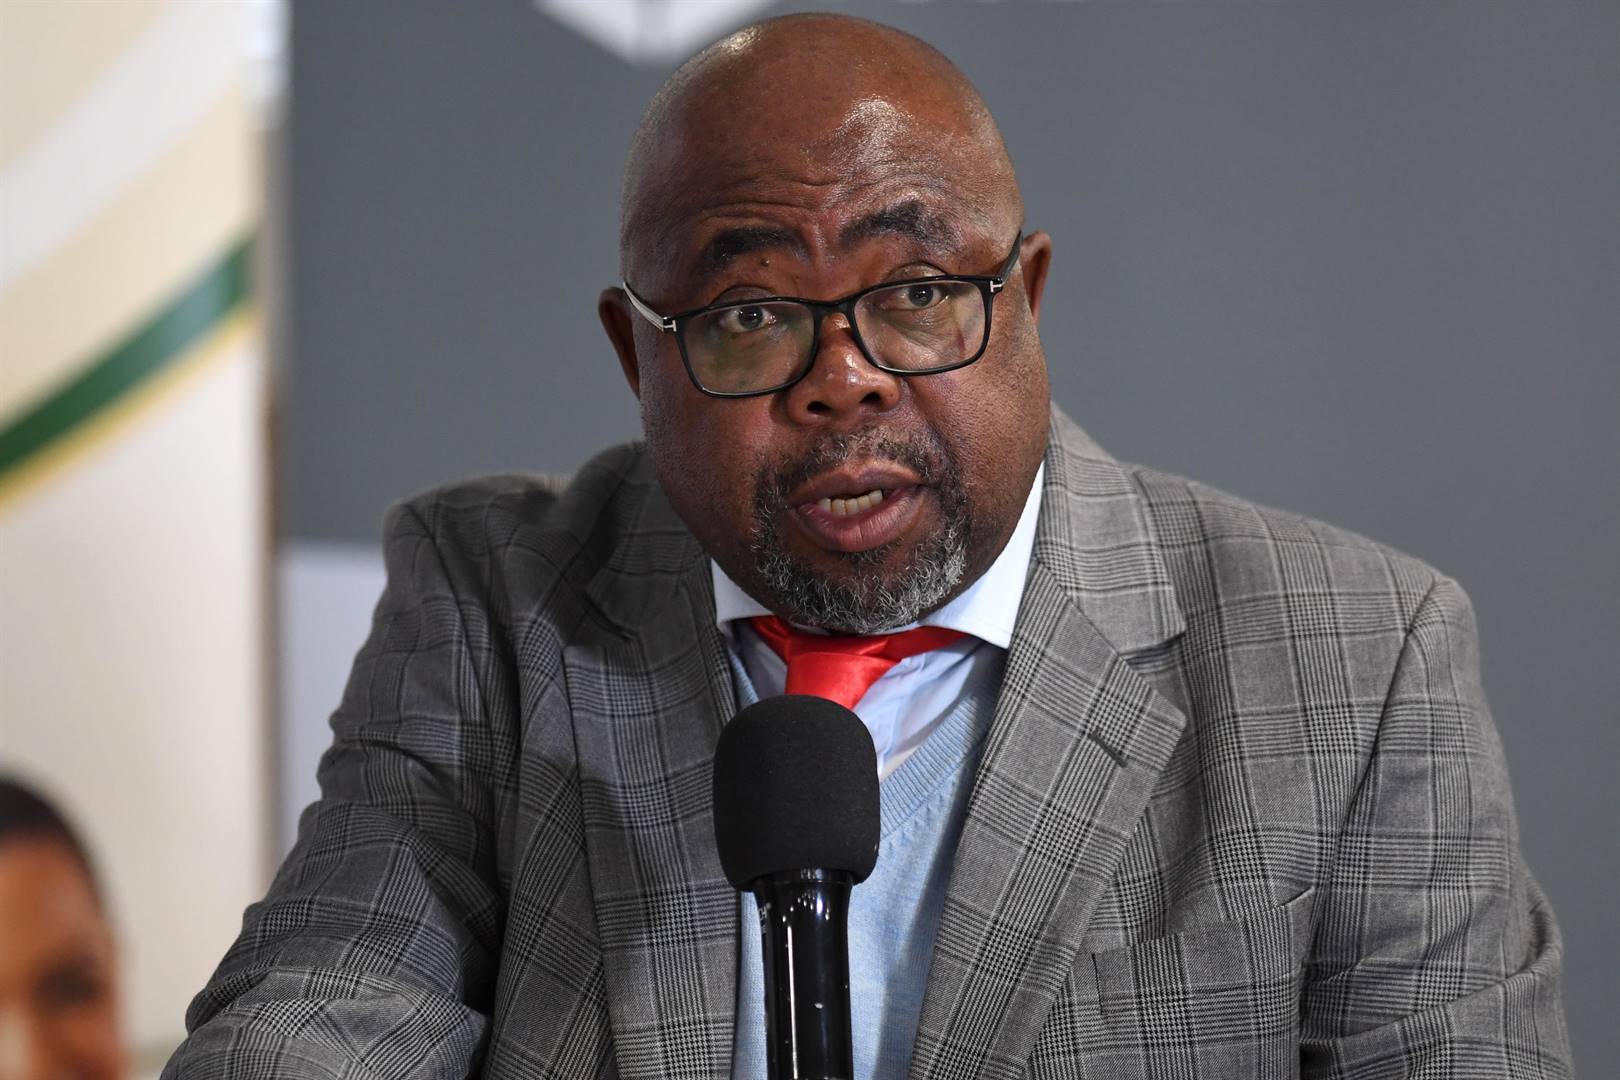 Thulas Nxesi, Minister of Labour and Employment, wants action against his director general for UIF investment dalliances.